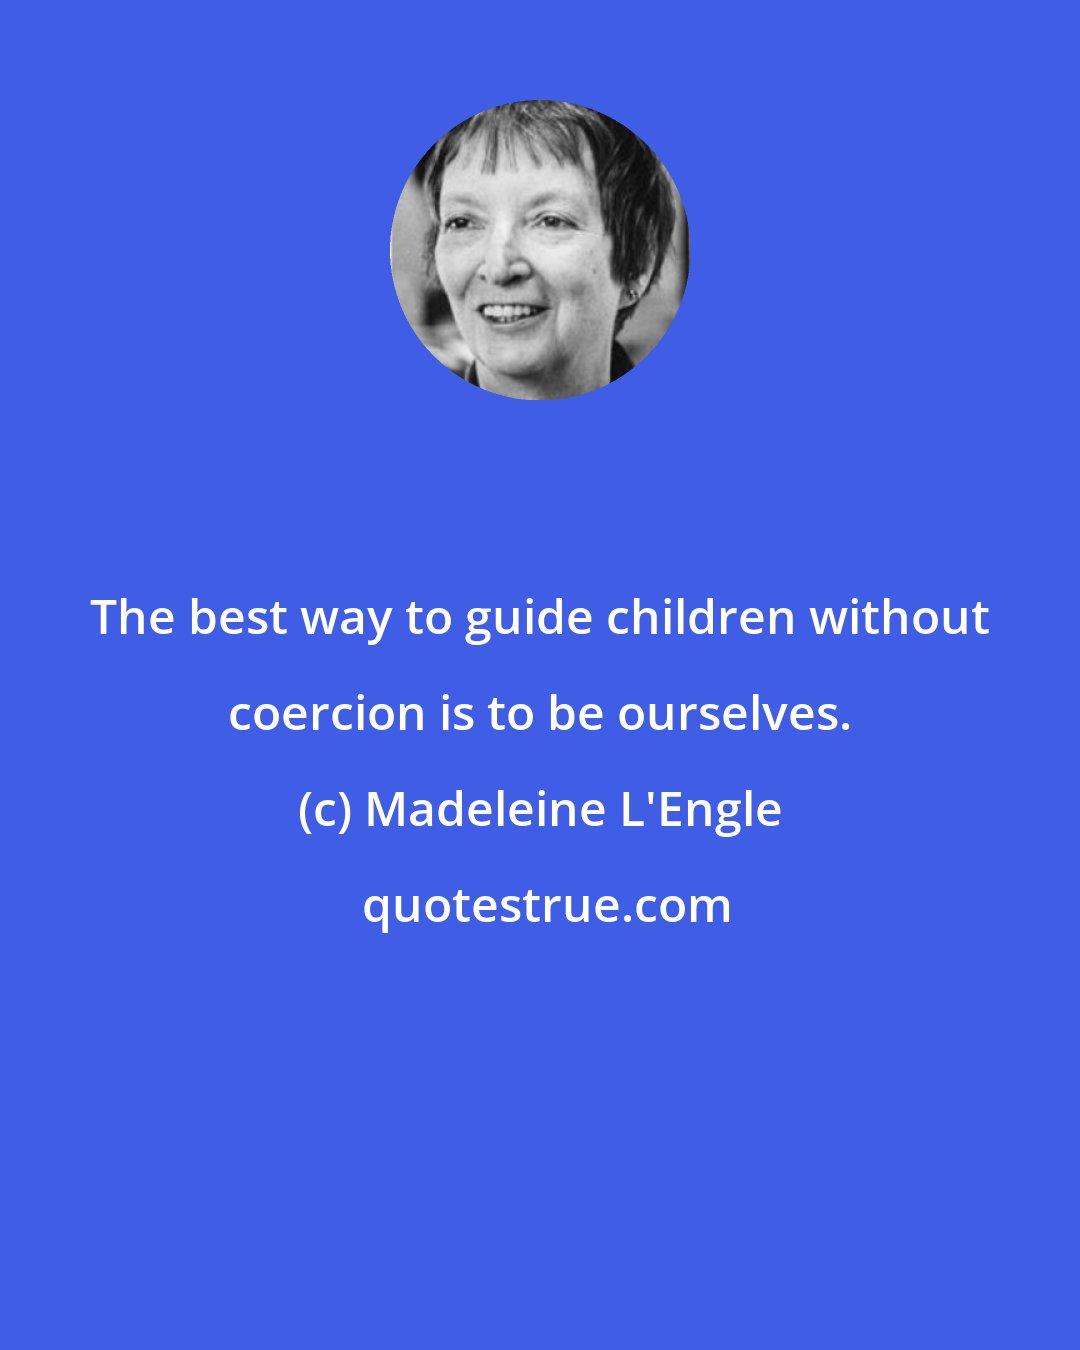 Madeleine L'Engle: The best way to guide children without coercion is to be ourselves.